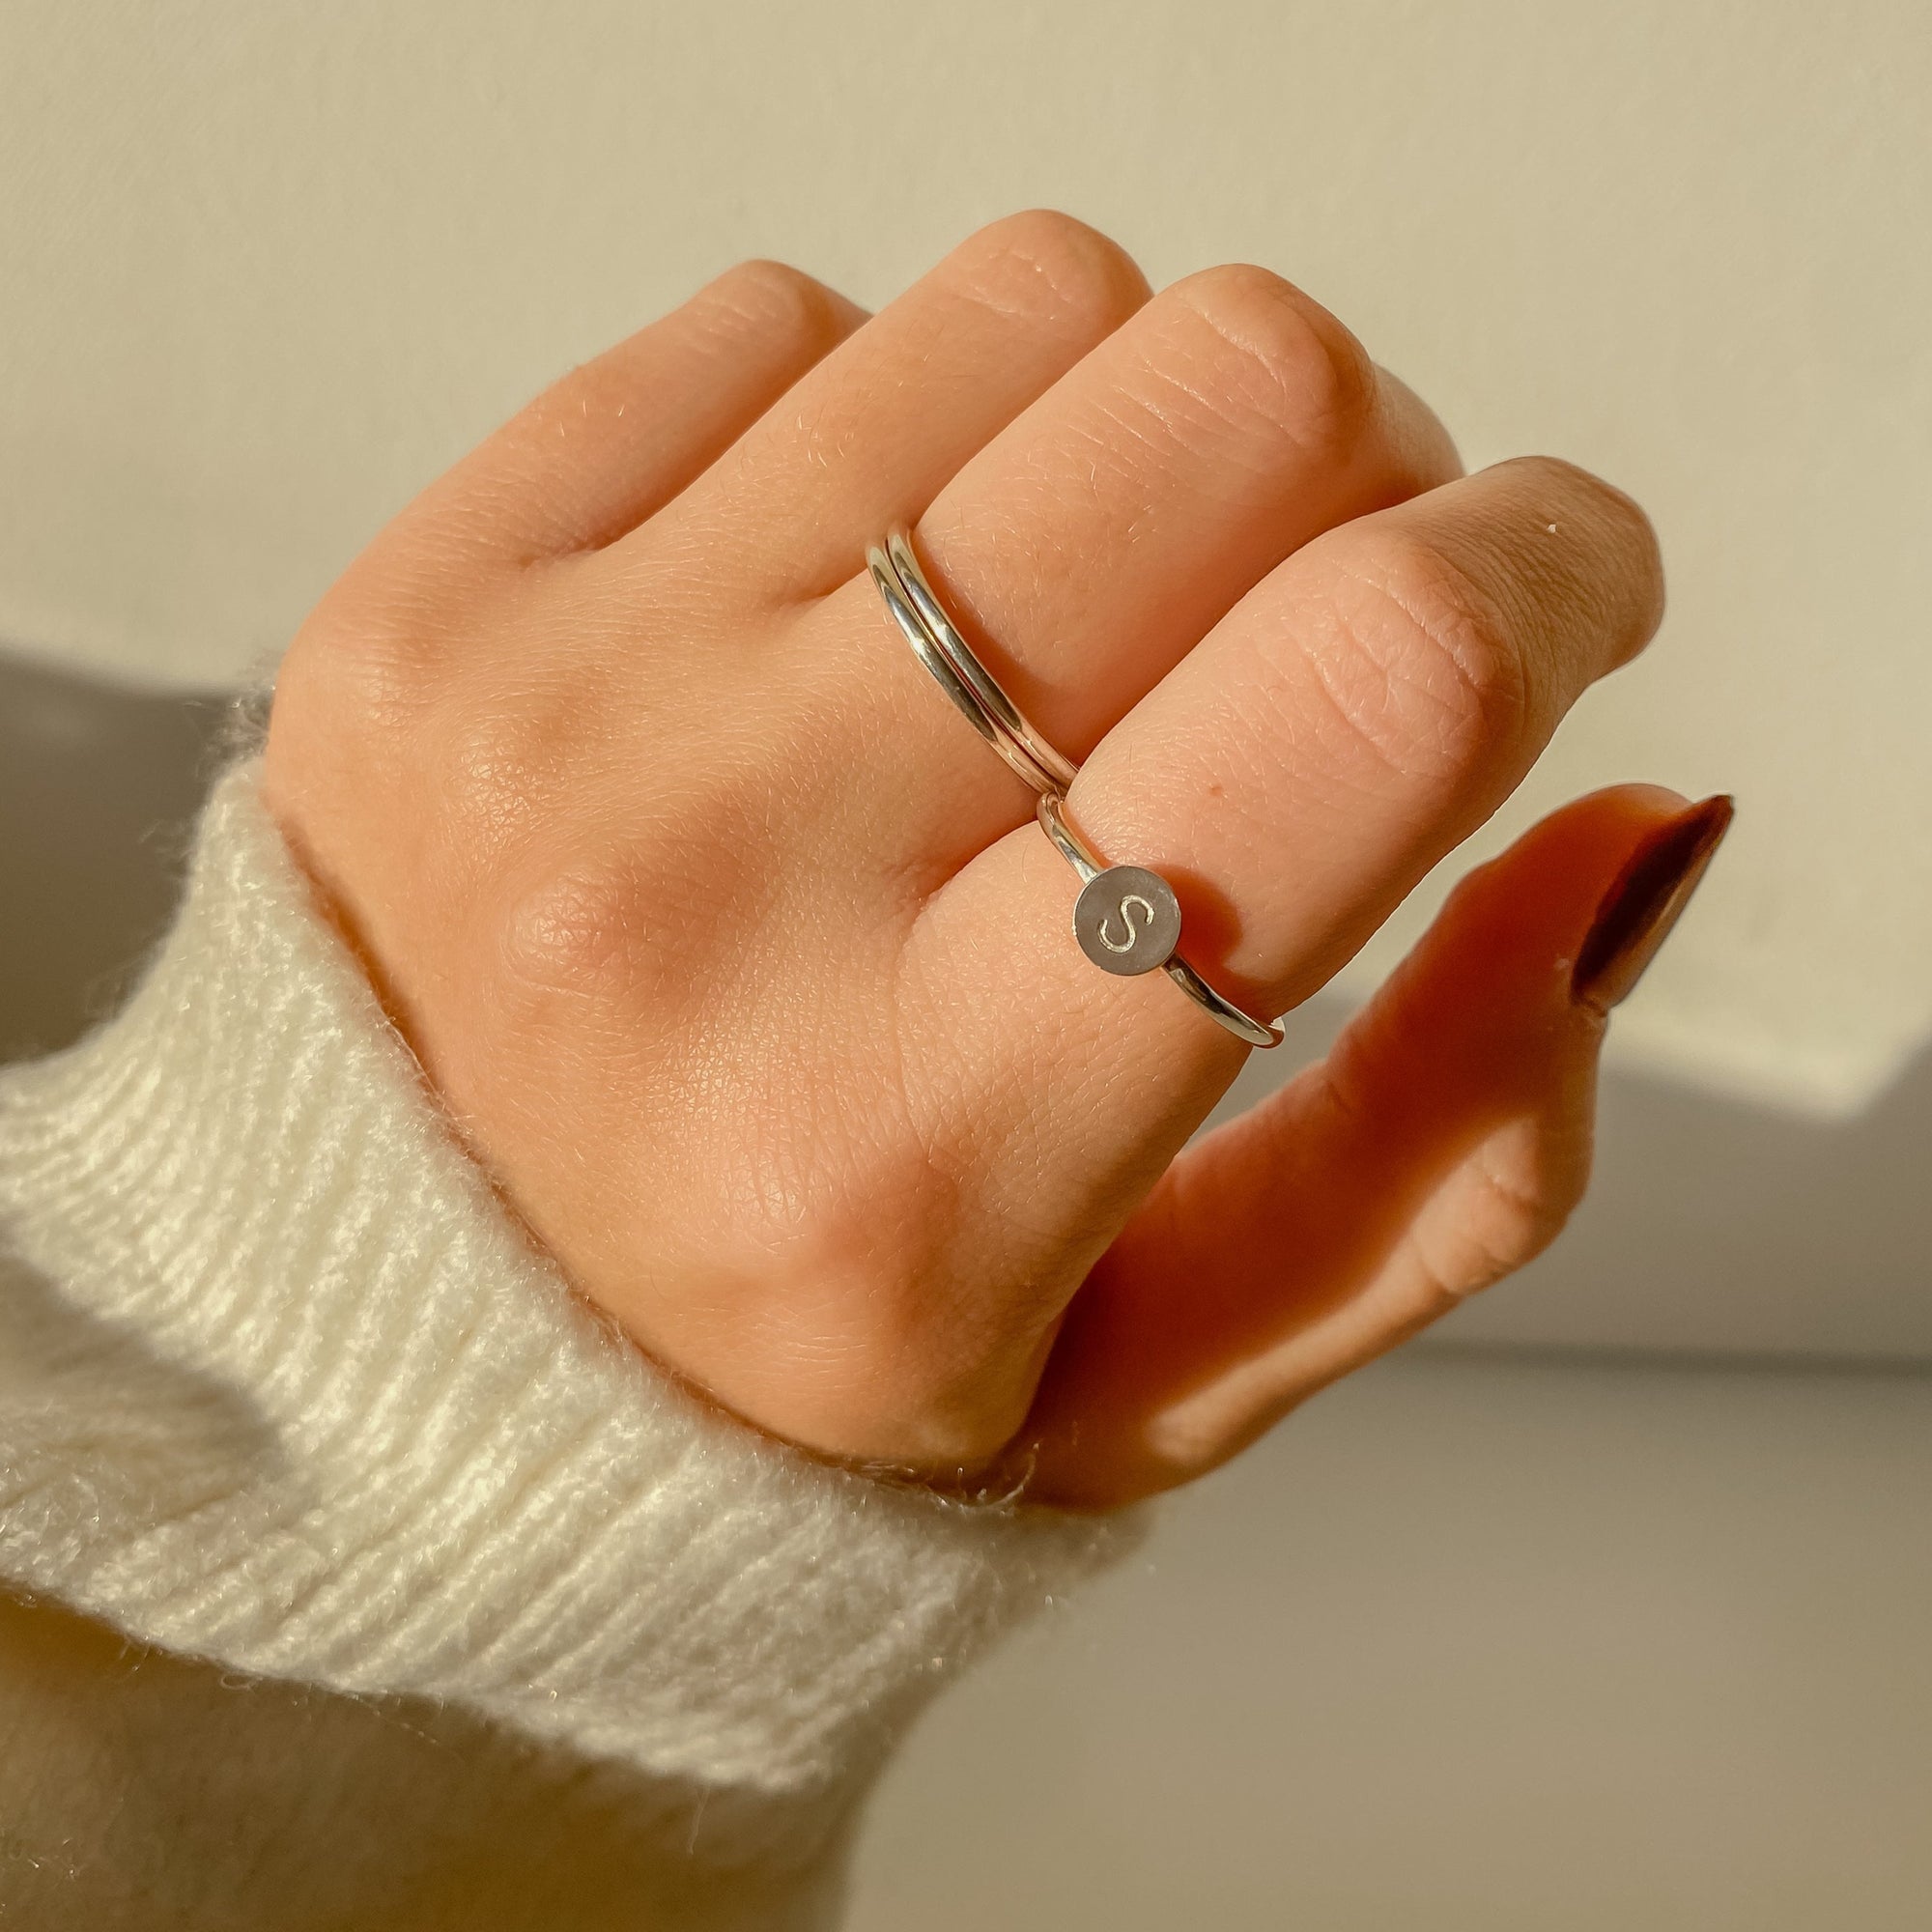 Silver ring with initial